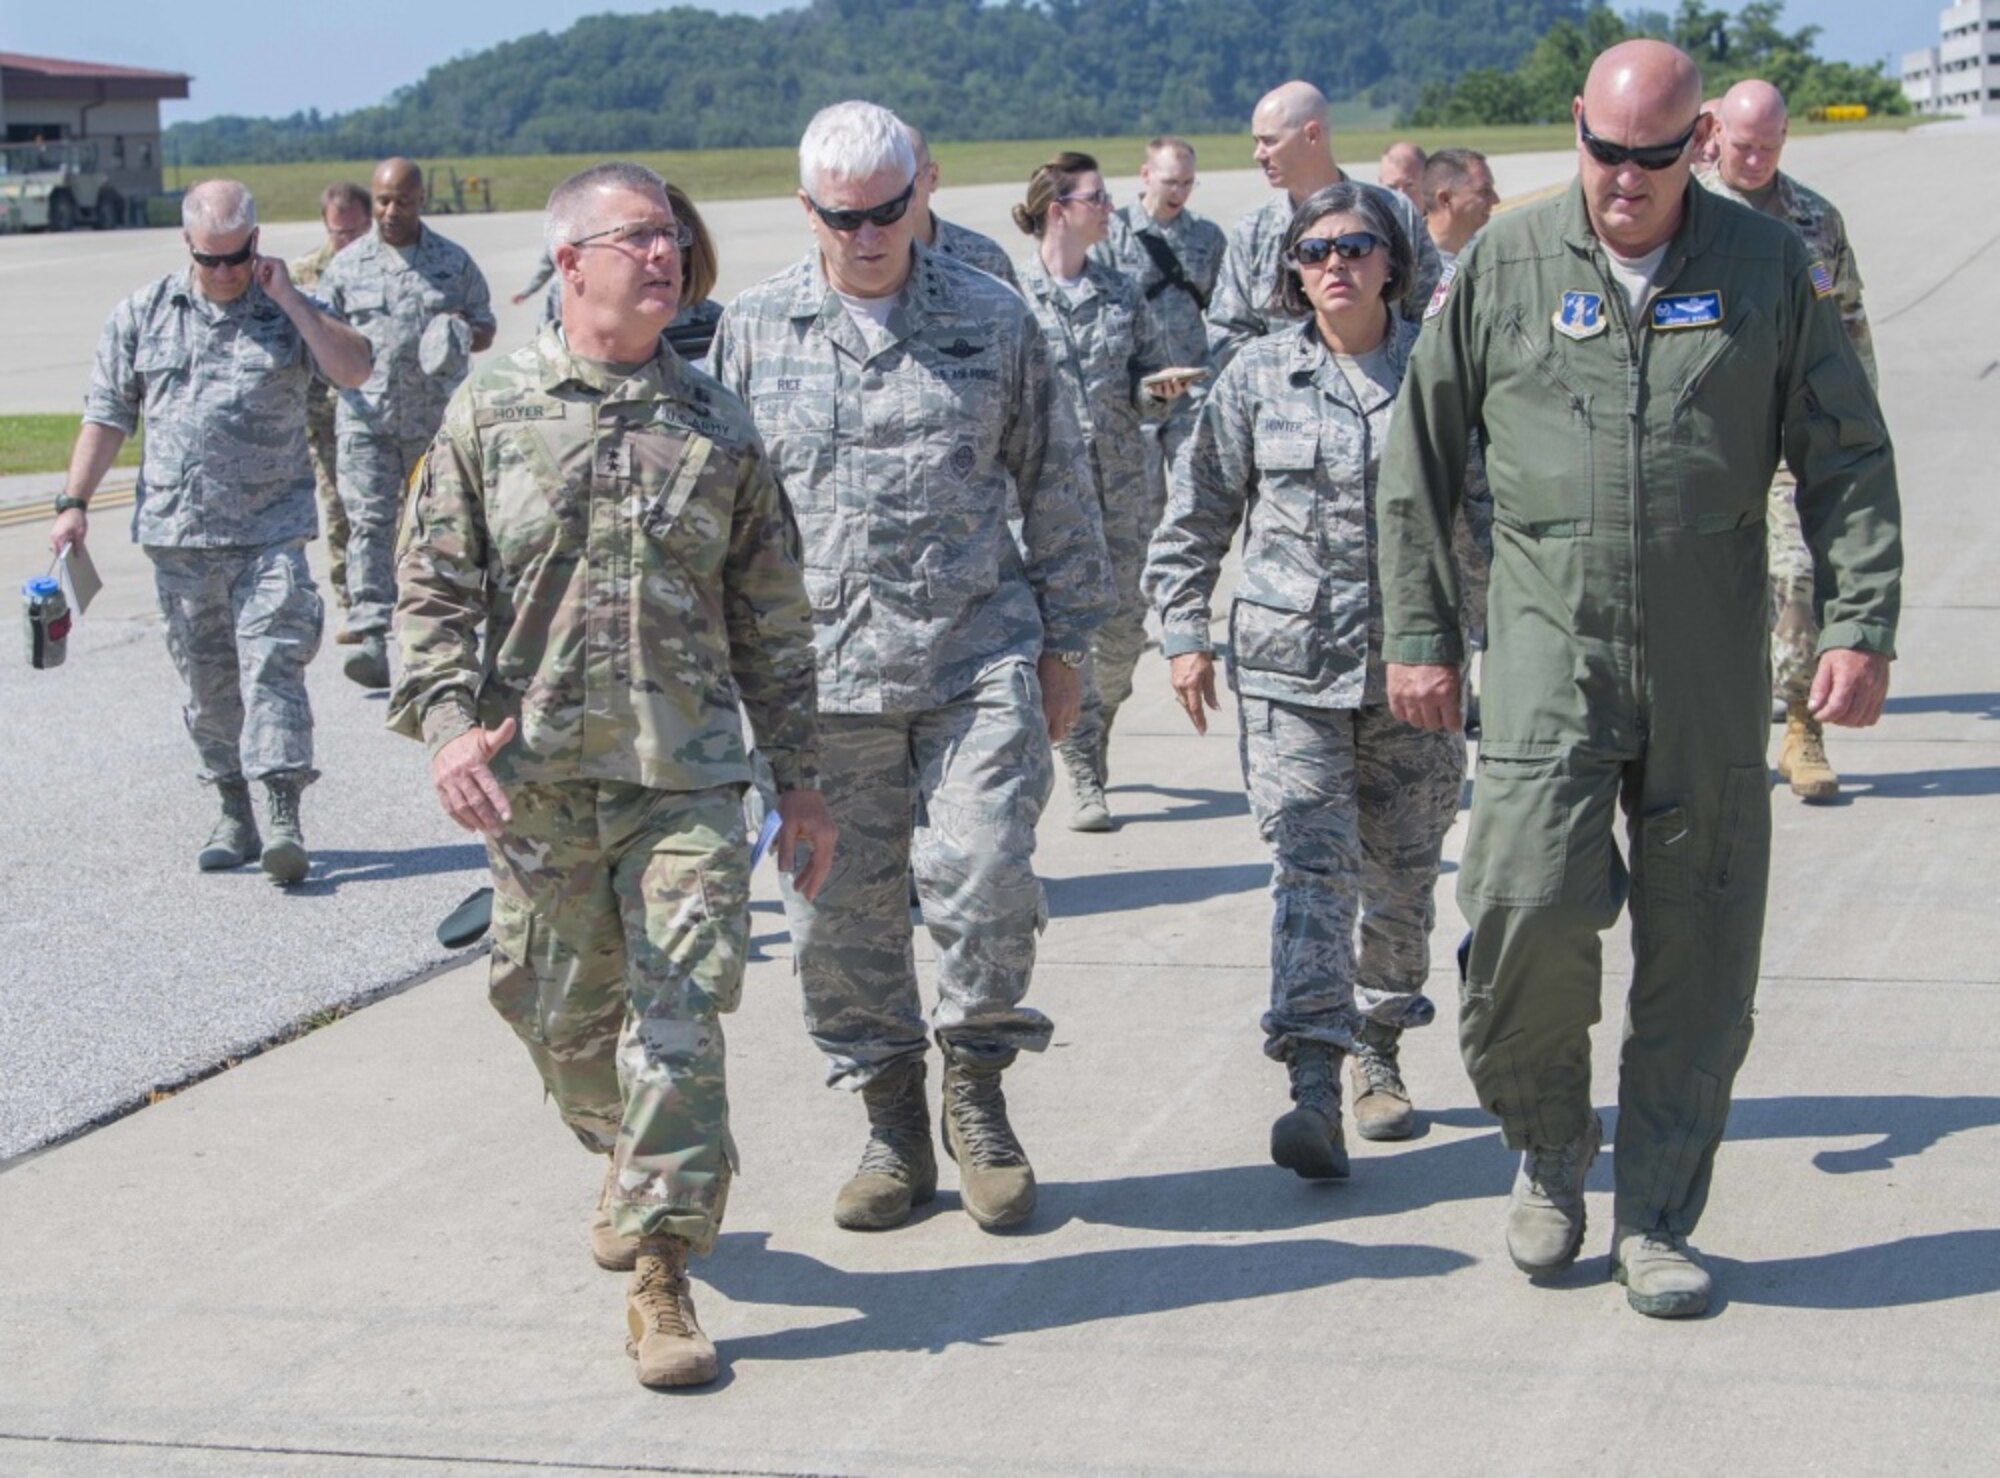 Maj. Gen. James A. Hoyer, the Adjutant General of the West Virginia National Guard, walks alongside Director of the Air National Guard, Lt. Gen. L. Scott Rice, Assistant Adjutant for Air, Brig. Gen. Paige Hunter, and 130th Airlift Wing commander, Col. Johnny Ryan during a visit to McLaughlin Air National Guard Base July 26, 2017. Rice and Air National Guard Command Chief Master Sgt. Ronald Anderson gained insight into the 130th AW mission and recognized the accomplishments of some of the unit’s outstanding Airmen through a coining ceremony. (U.S. Air National Guard photo by Tech. Sgt. De-Juan Haley) 